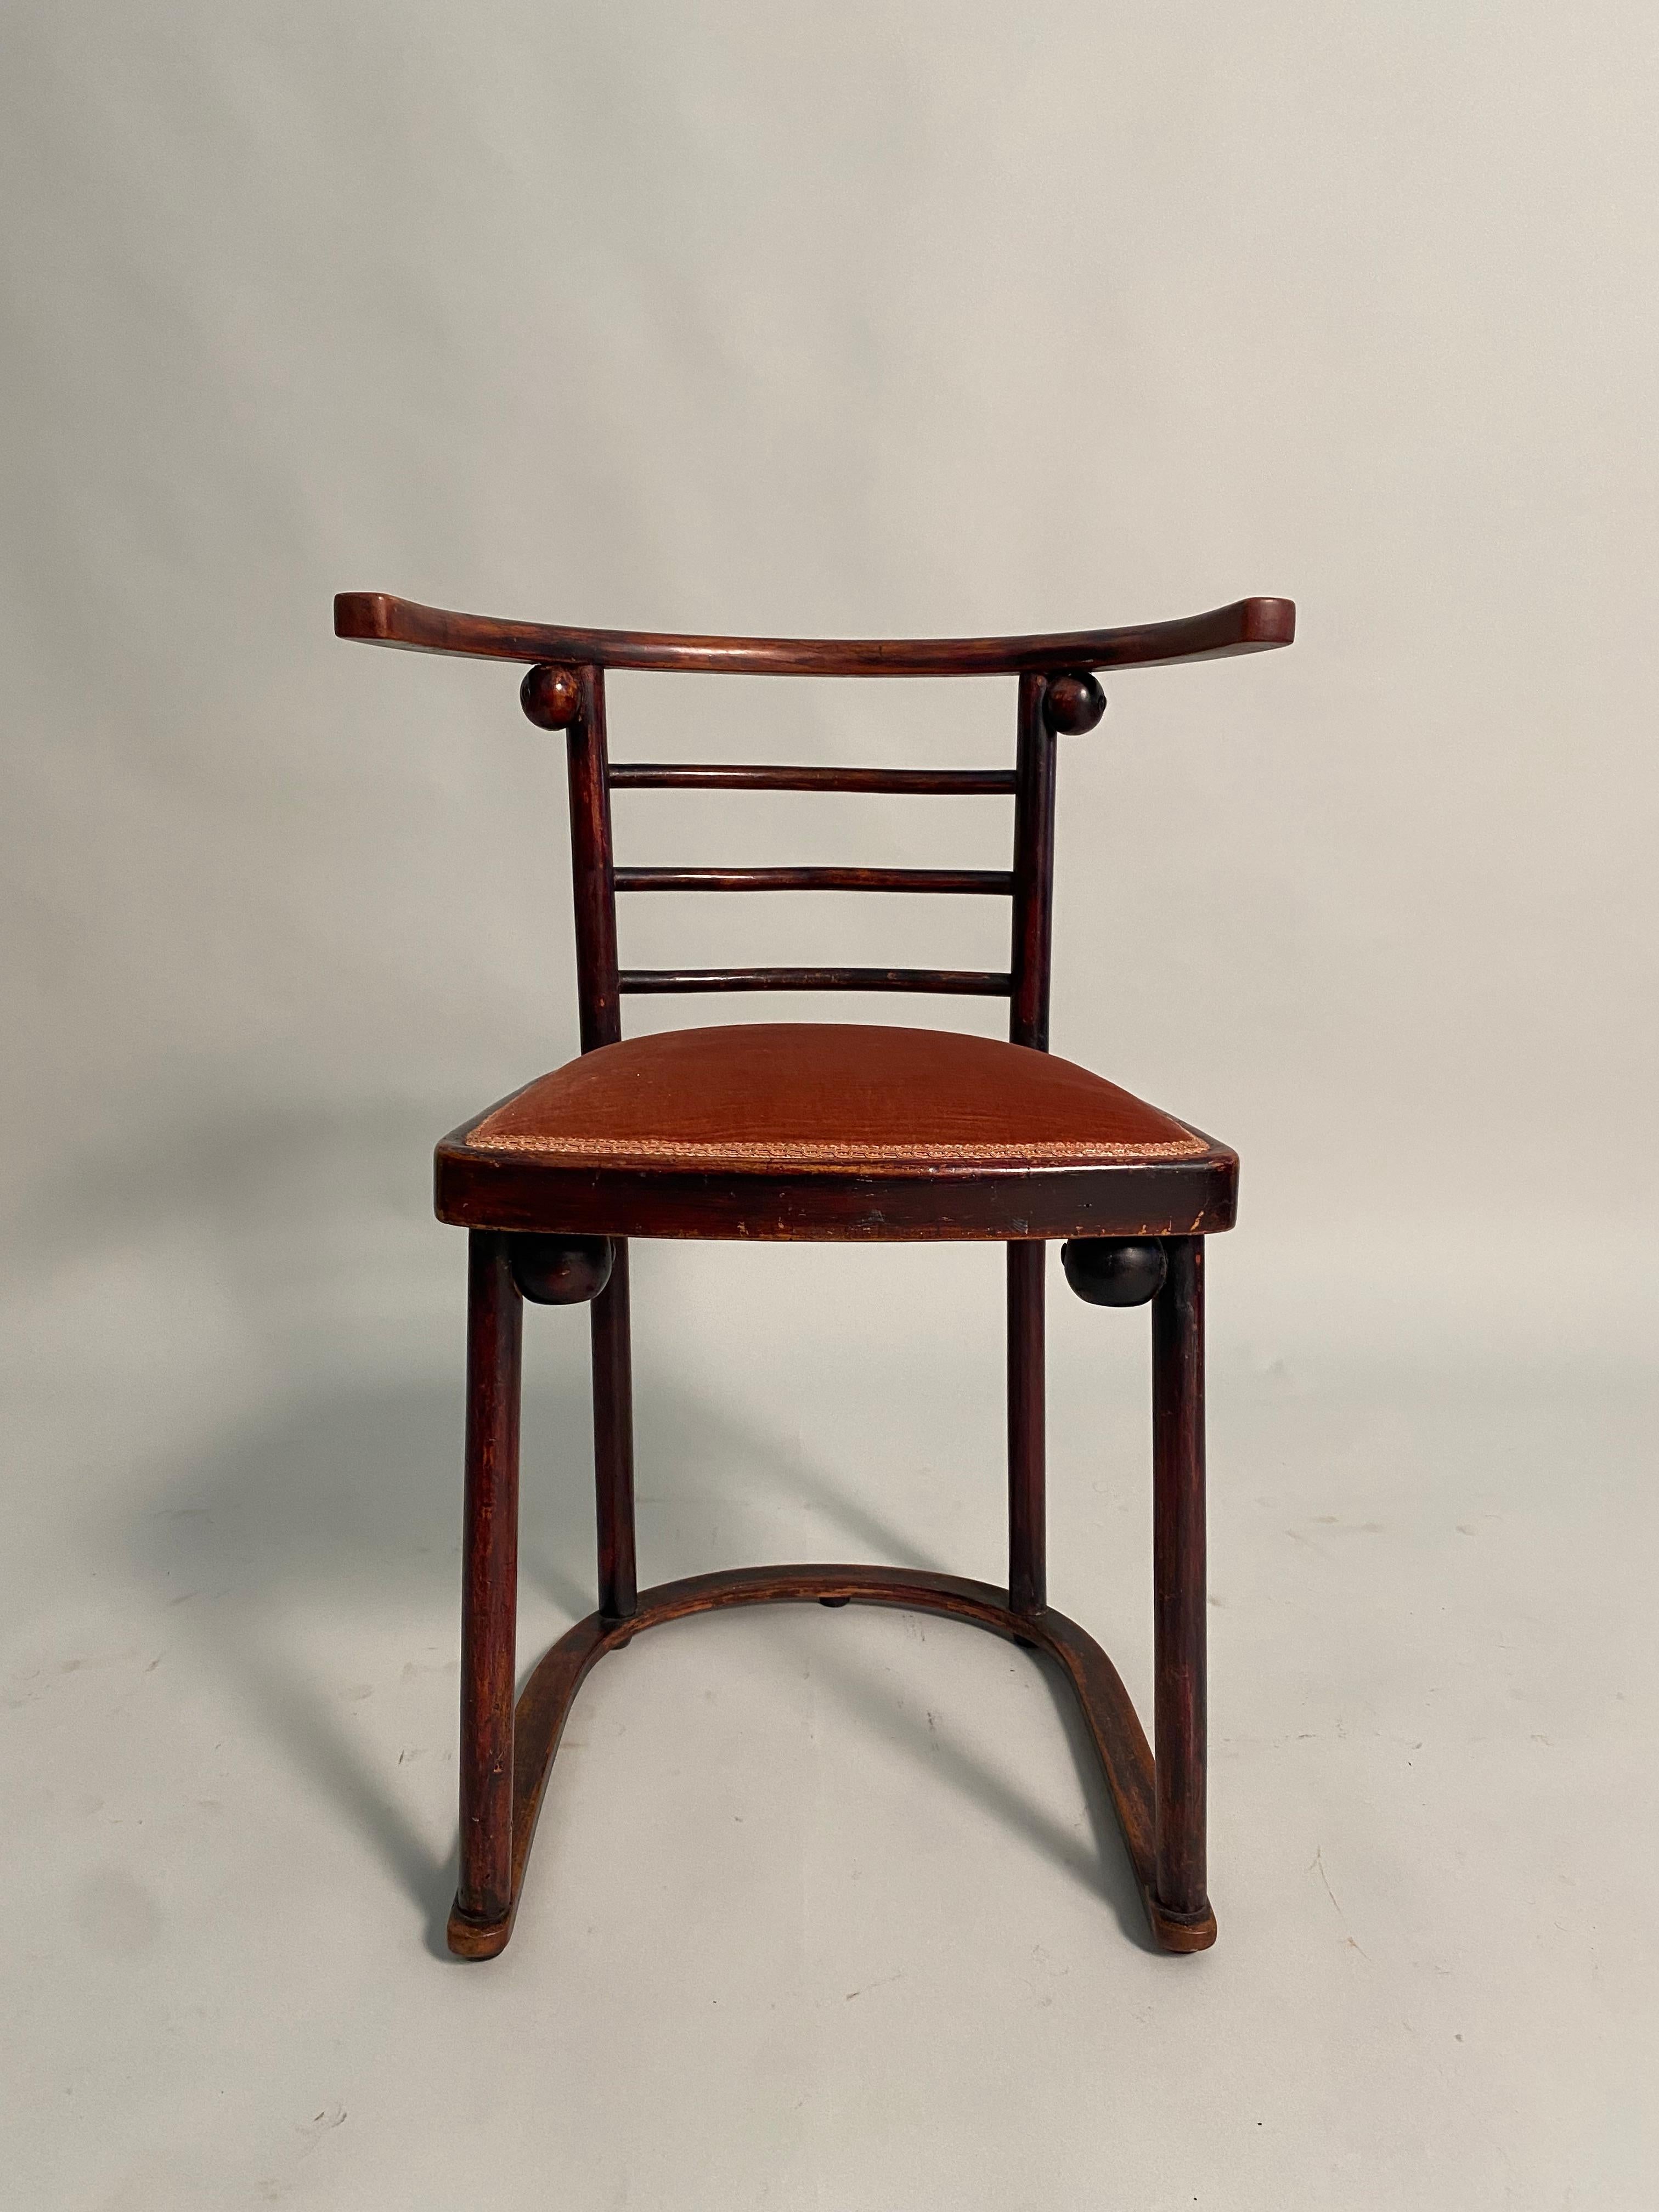 Three rare chairs in bent beech designed by the illustrious Viennese architect Joseph Hoffmann for the Cabaret Fledermaus in Vienna in 1907. Produced by the Kohn company, the chairs represent one of the most famous beginnings in the history of